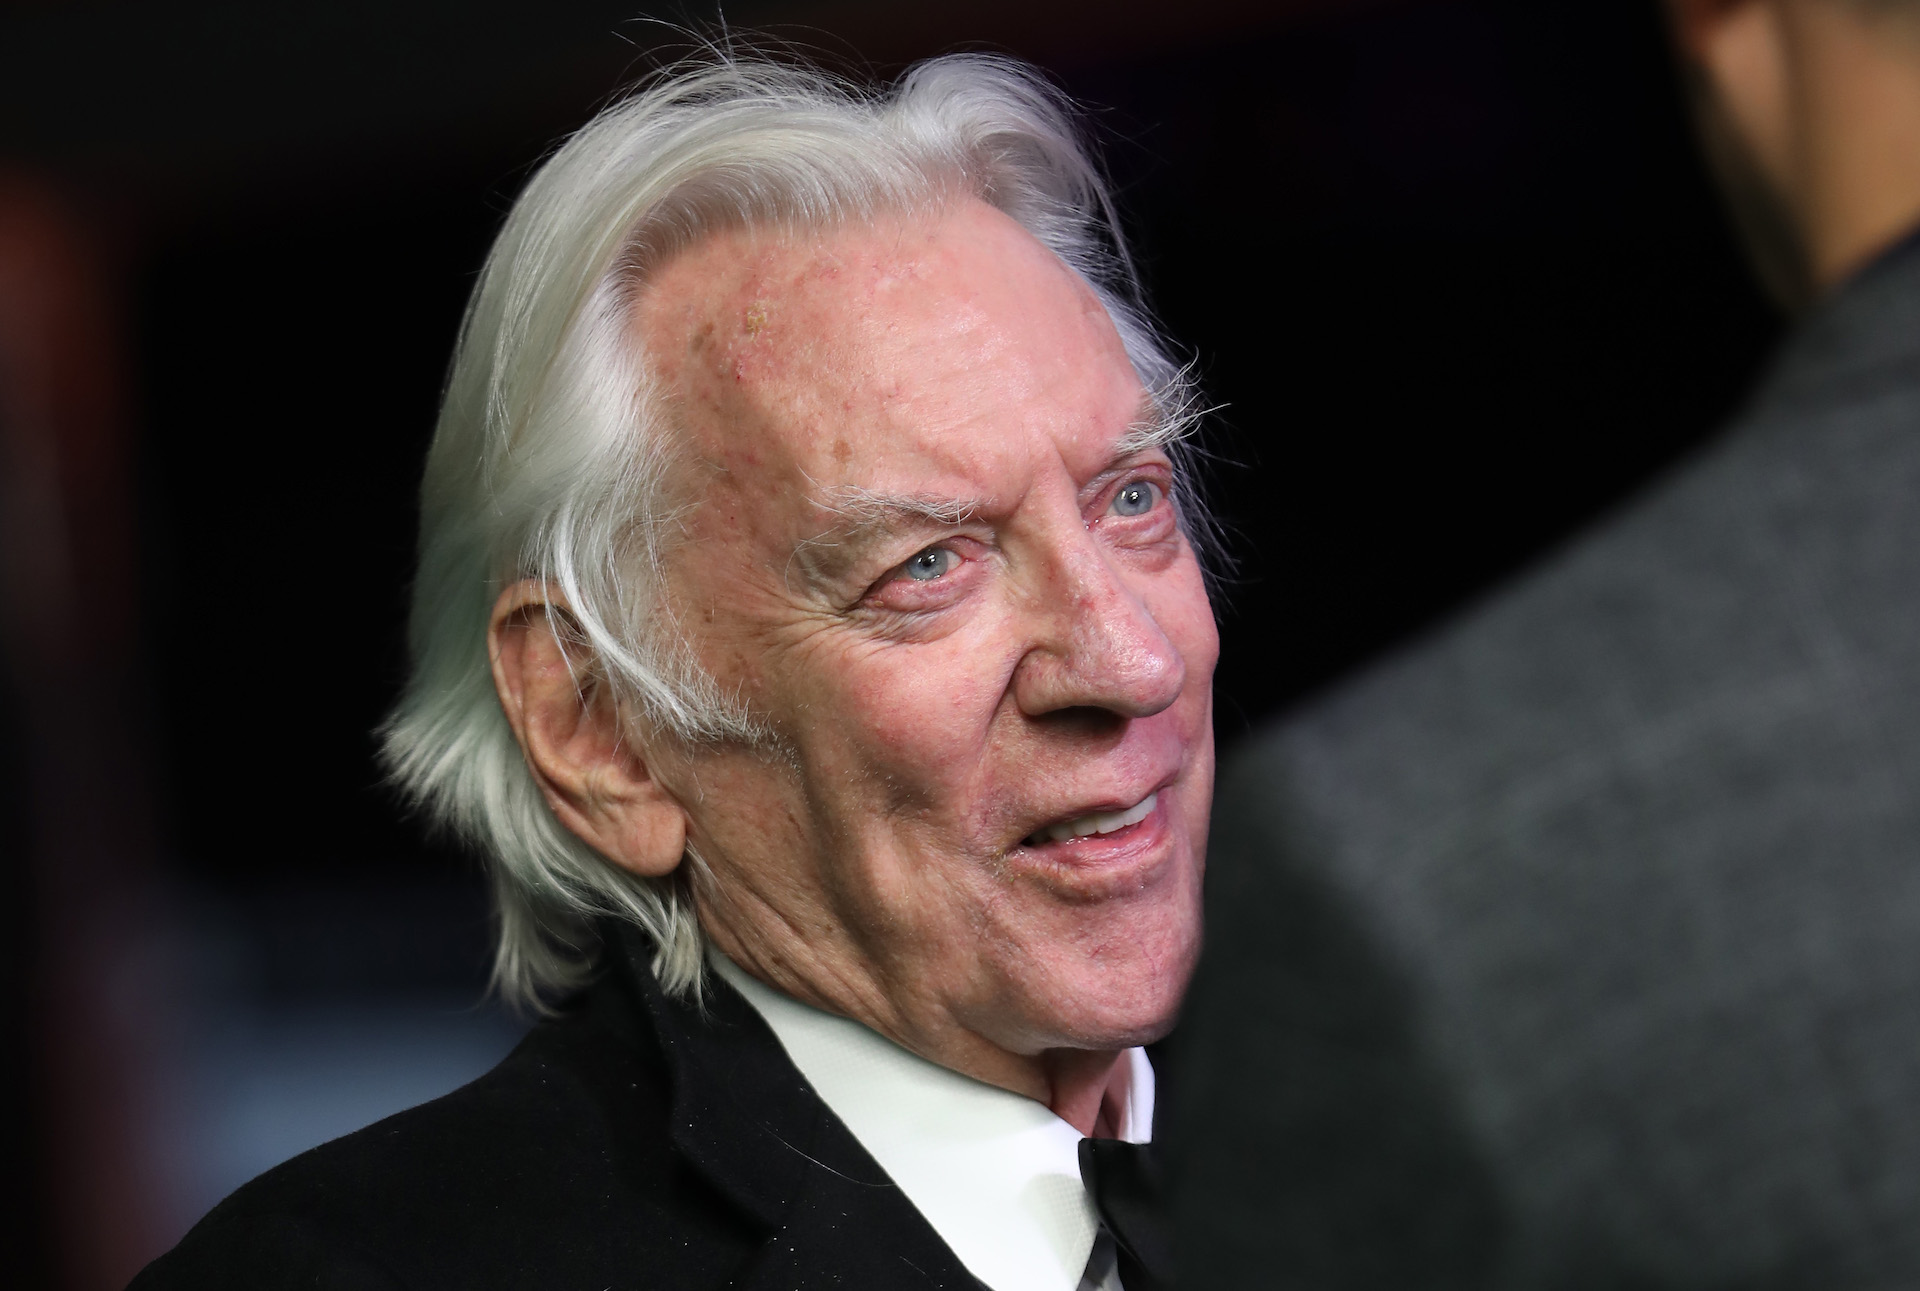 ZURICH, SWITZERLAND - SEPTEMBER 28:  Donald Sutherland attends the "The Burnt Orange Heresy" premiere during the 15th Zurich Film Festival at Kino Corso on September 28, 2019 in Zurich, Switzerland. (Photo by Ferda Demir/Getty Images for ZFF)